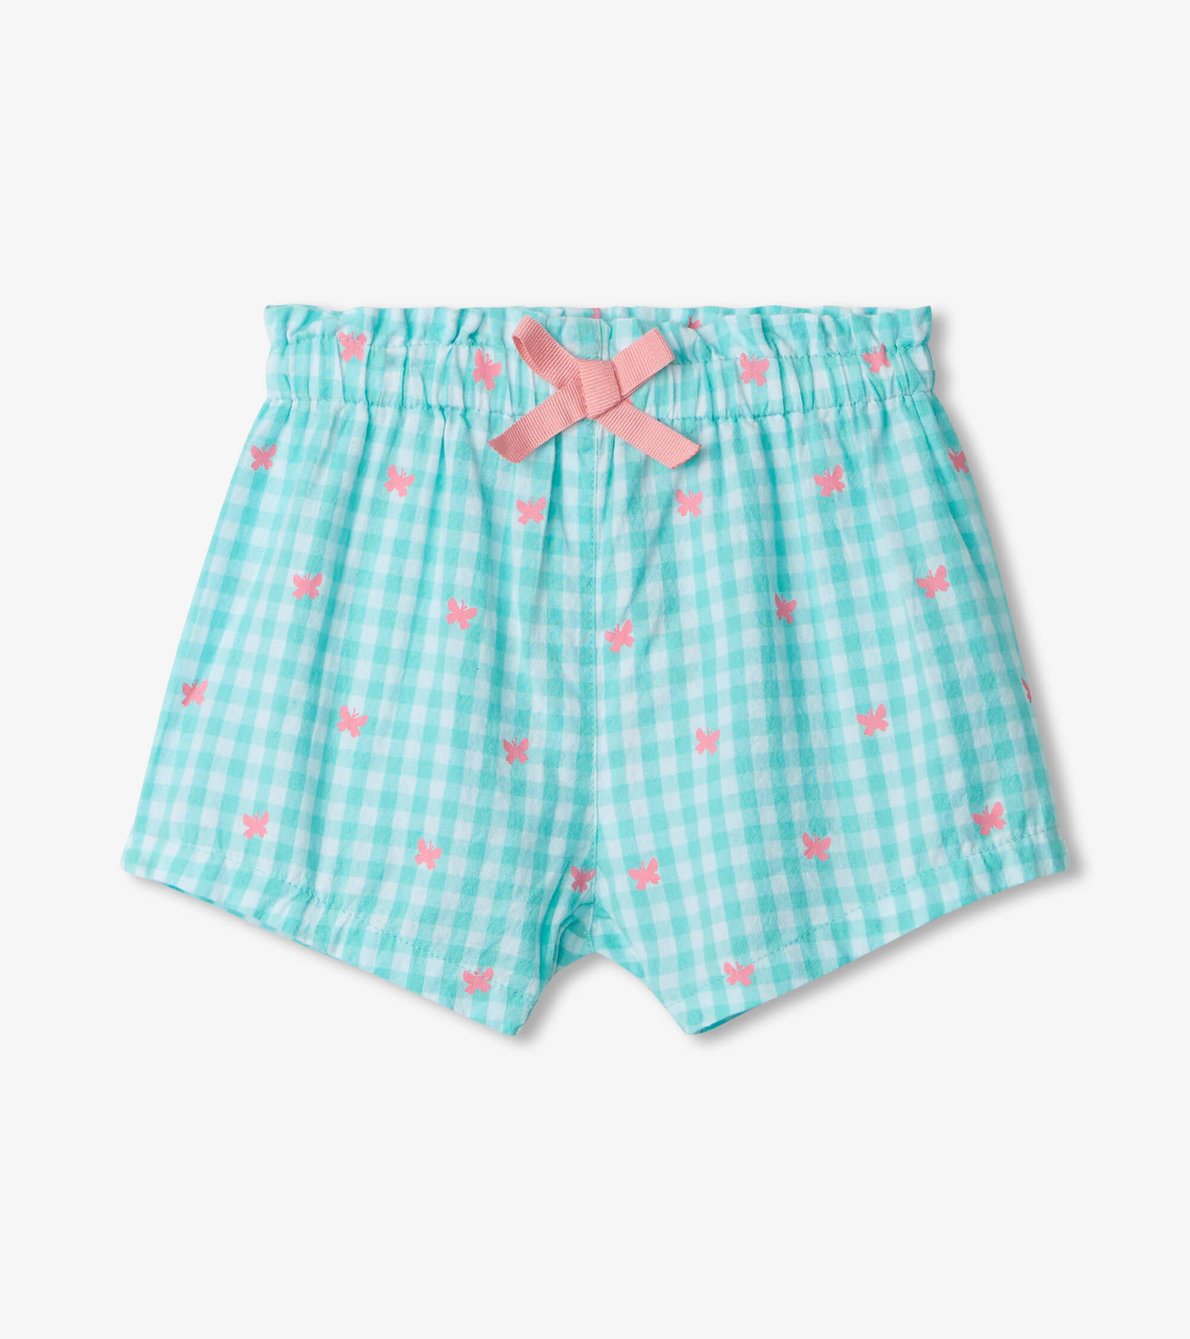 View larger image of Butterfly Gingham Baby Woven Paper Bag Shorts